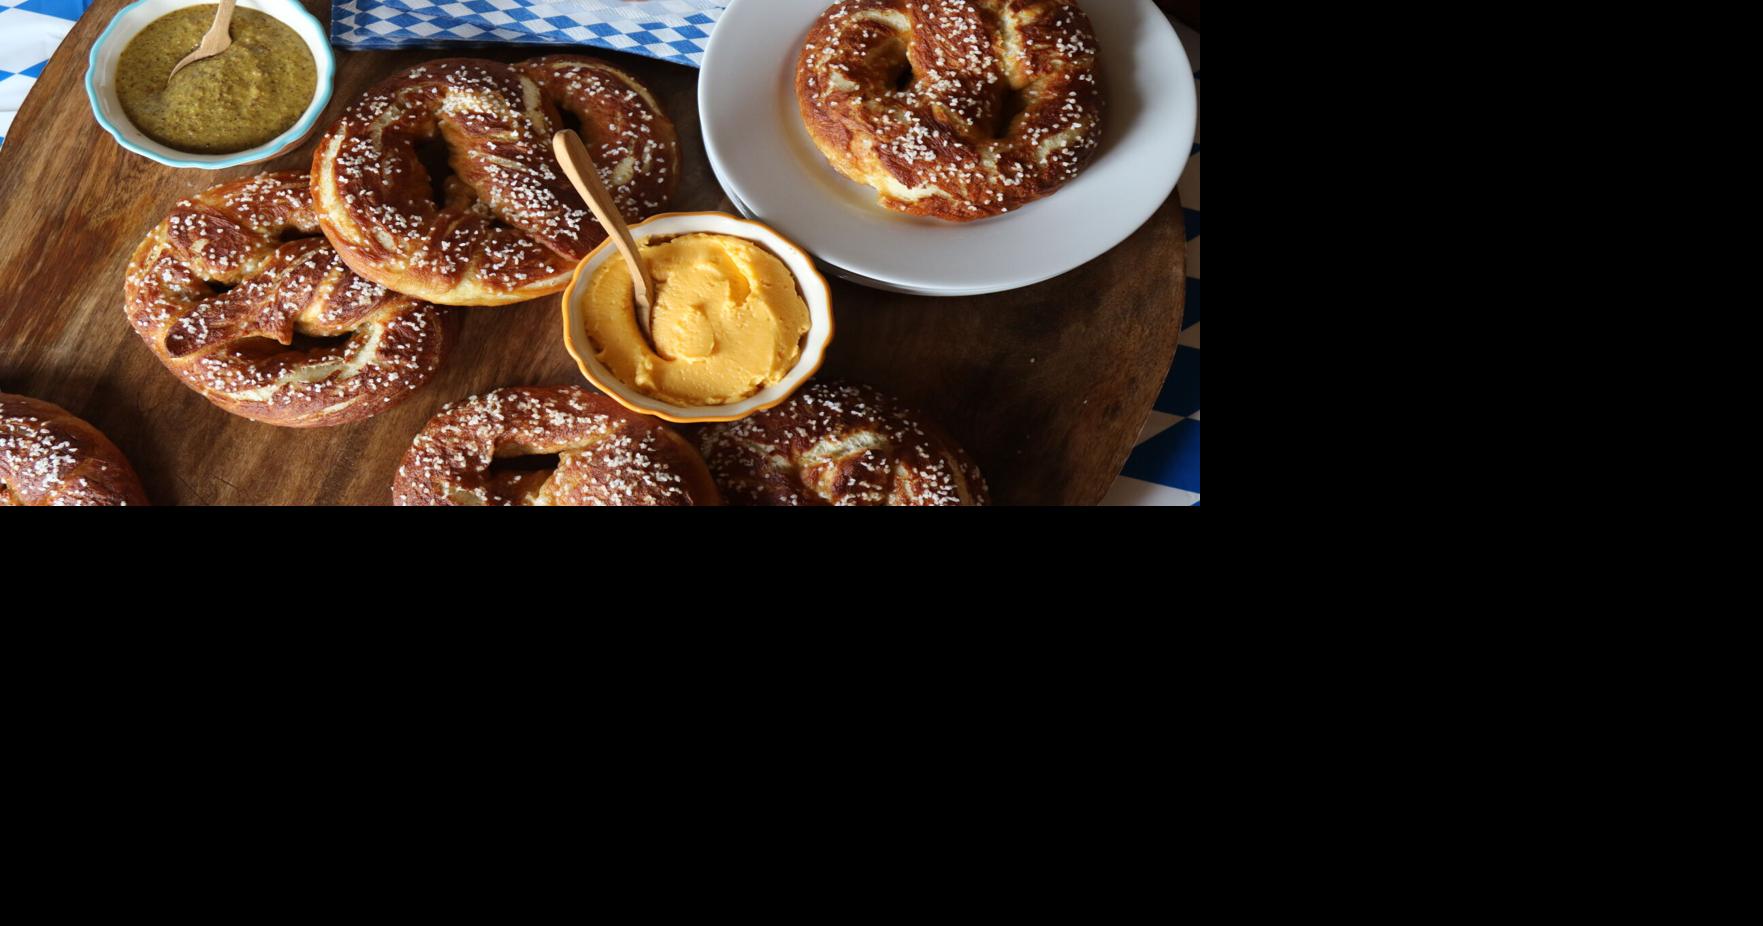 Hickory Farms - Tomorrow is National Mustard Day! Don't forget to